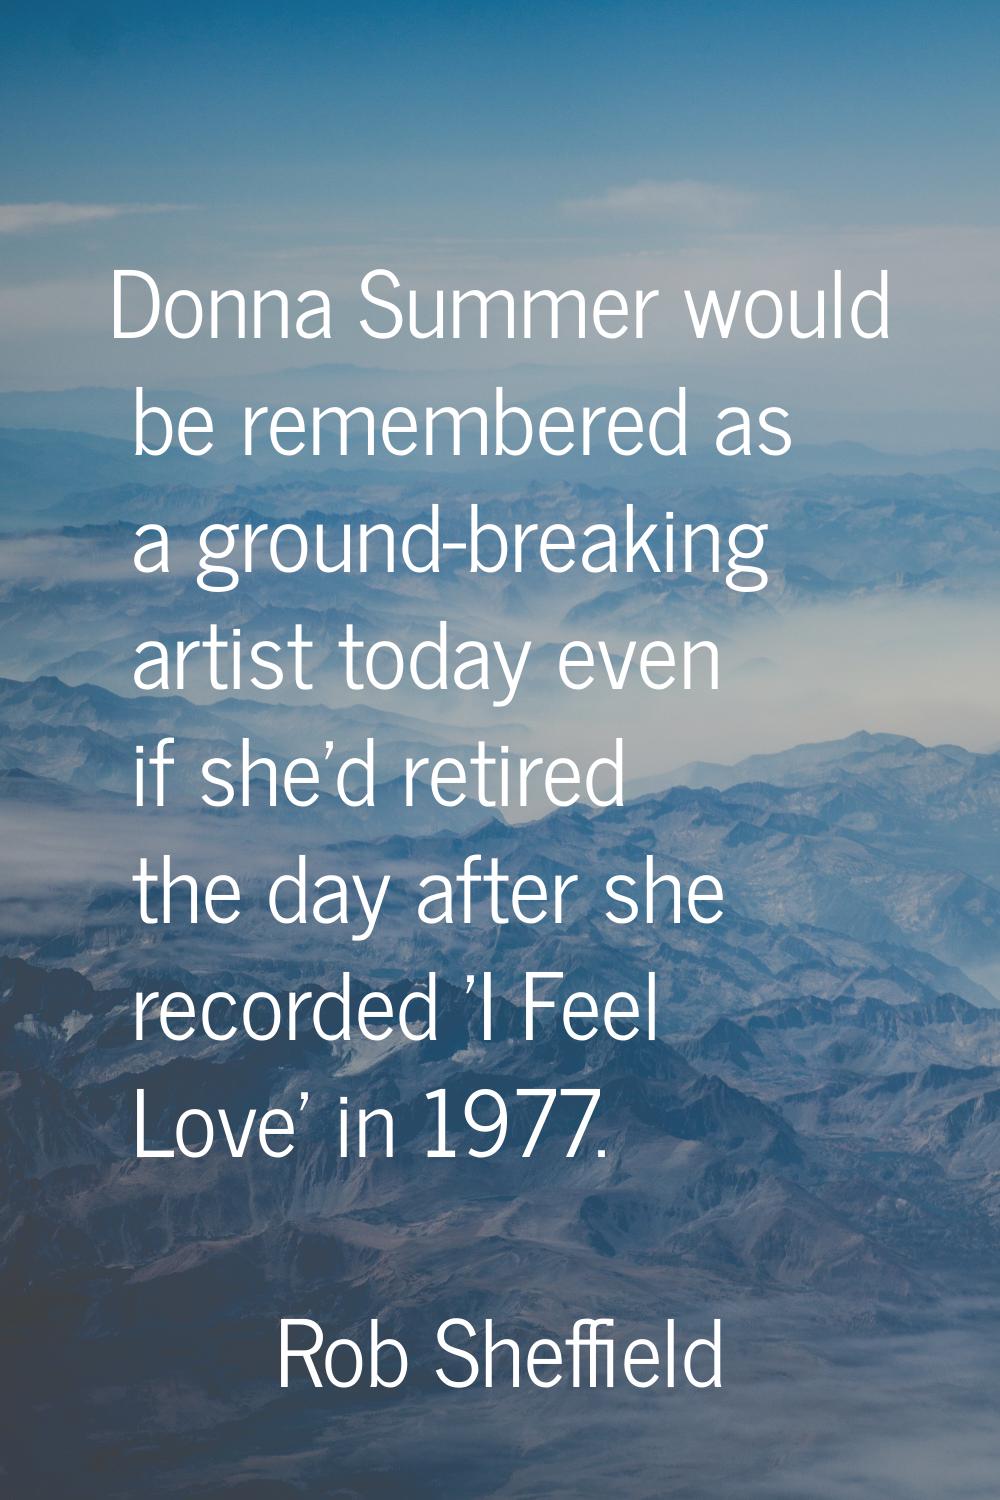 Donna Summer would be remembered as a ground-breaking artist today even if she'd retired the day af